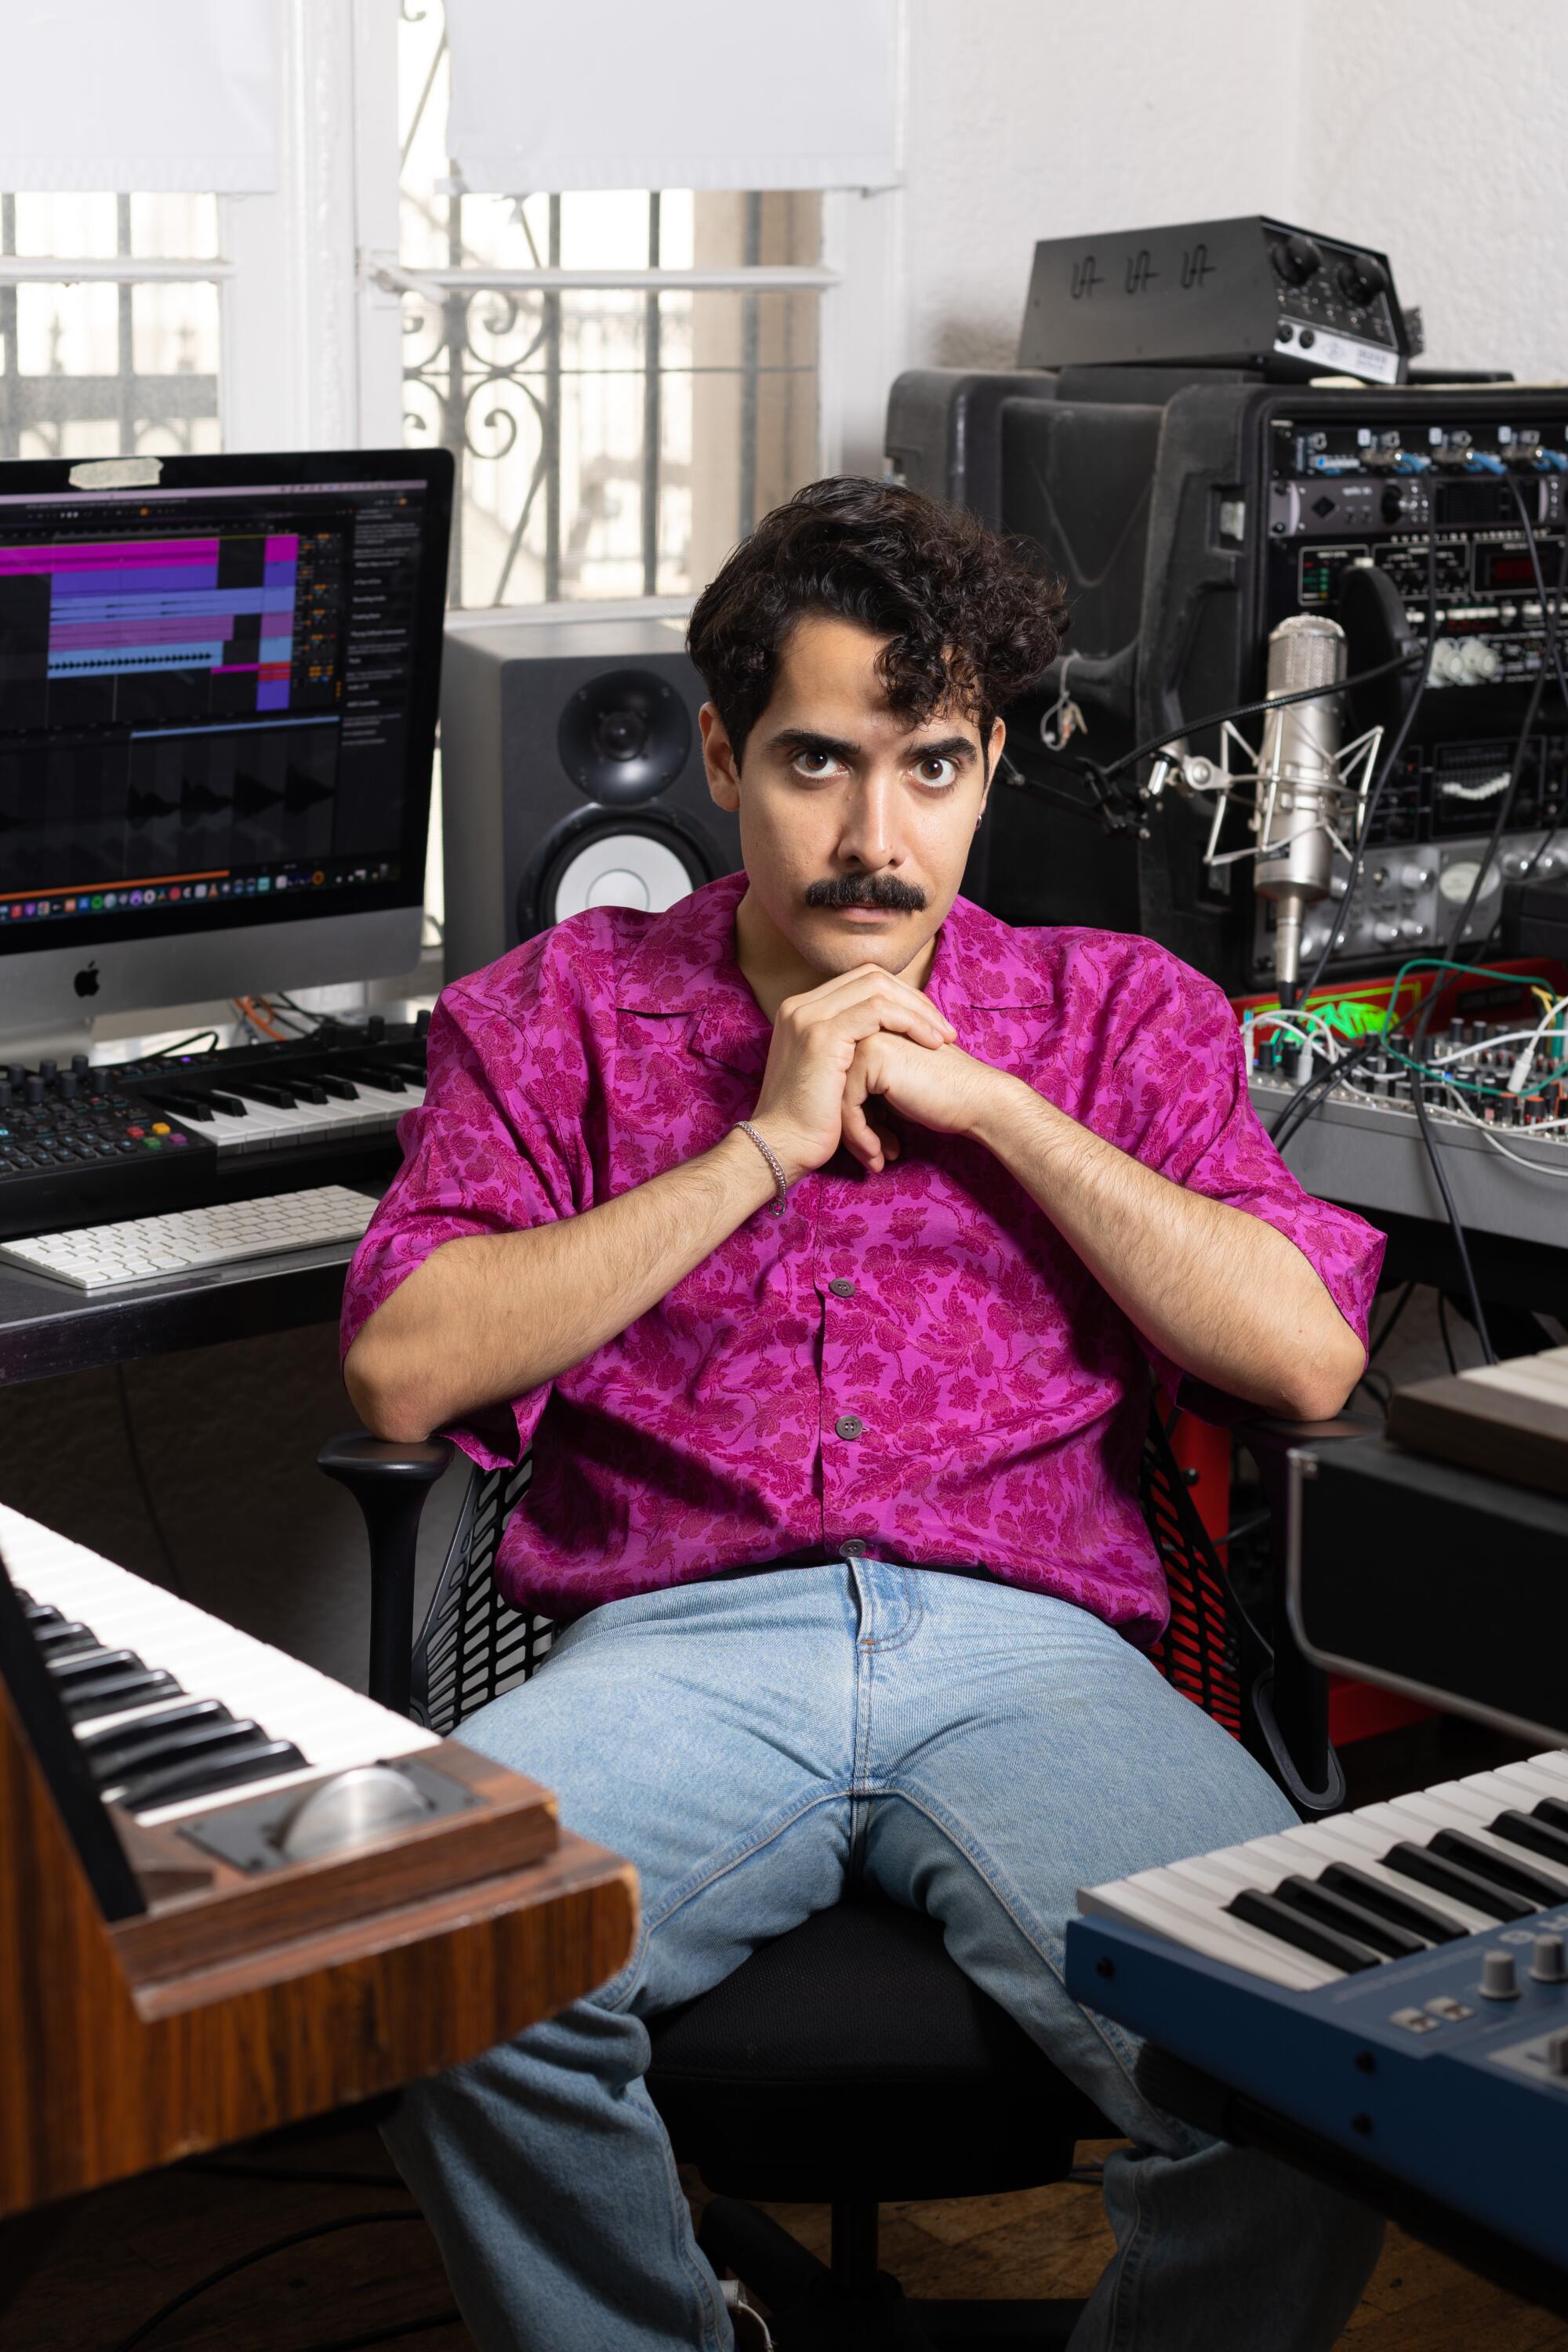 Alan Palomo rests his chin on his hands as he sits among his keyboards.